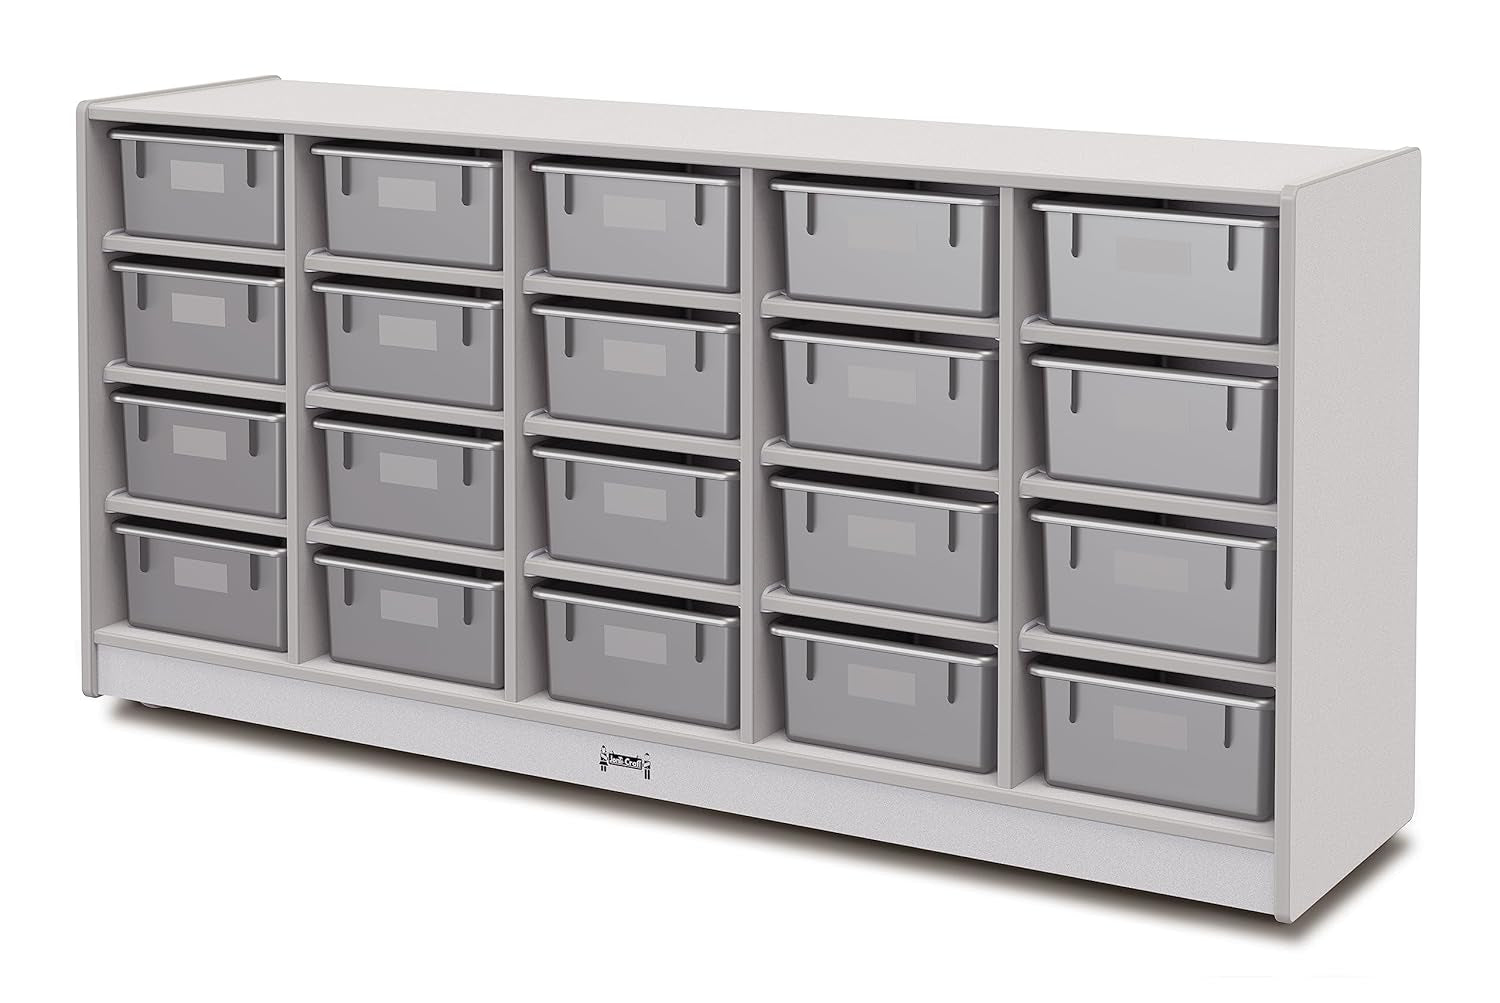 Rainbow Accents 4020JCWW000 20 Tub Mobile Storage - without Tubs - Gray